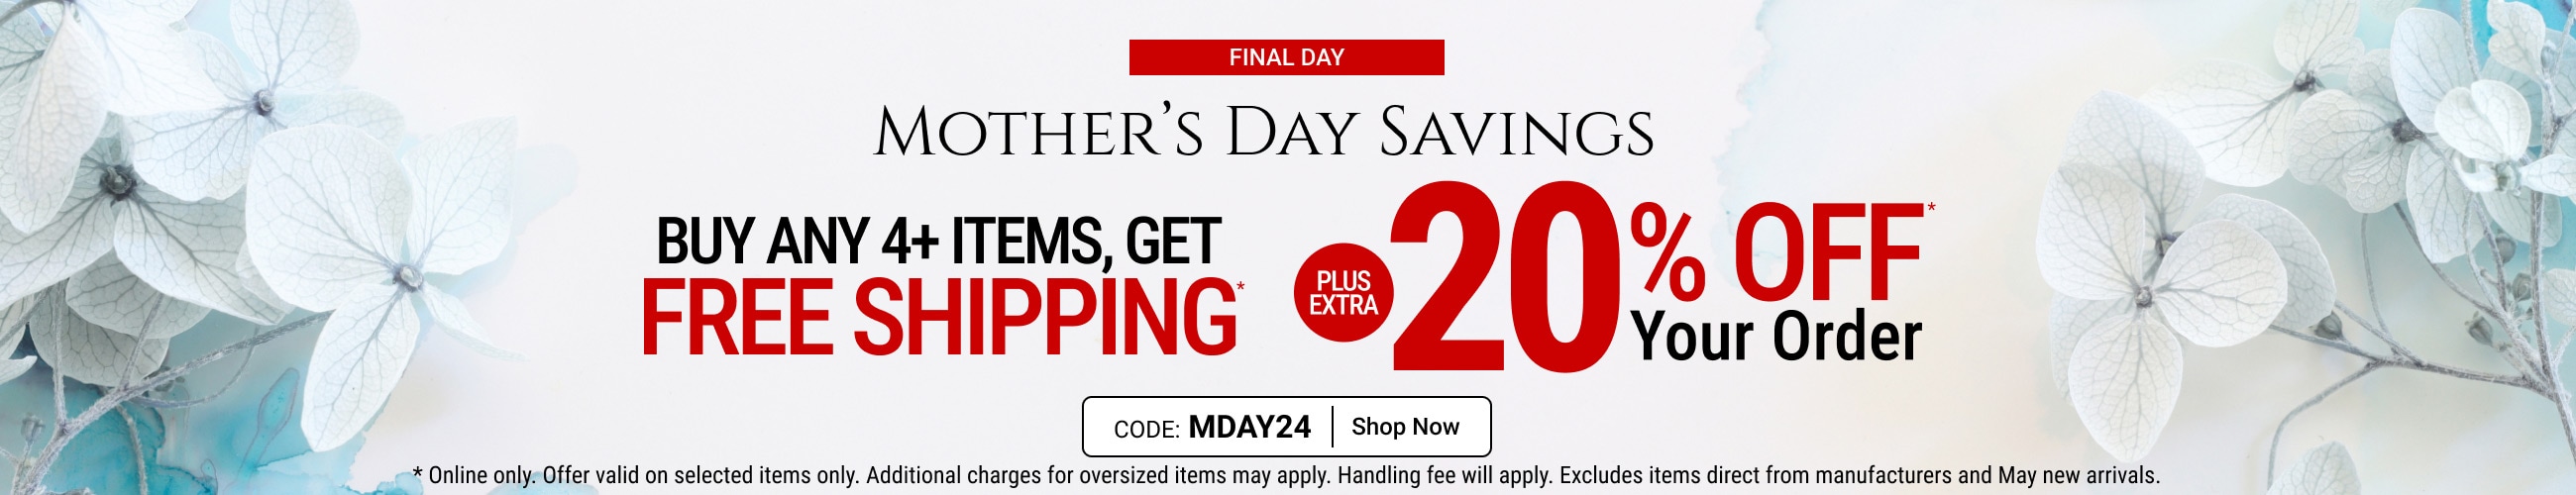 Mother's day sale up to 60% off + extra 25% off clearance - shop now